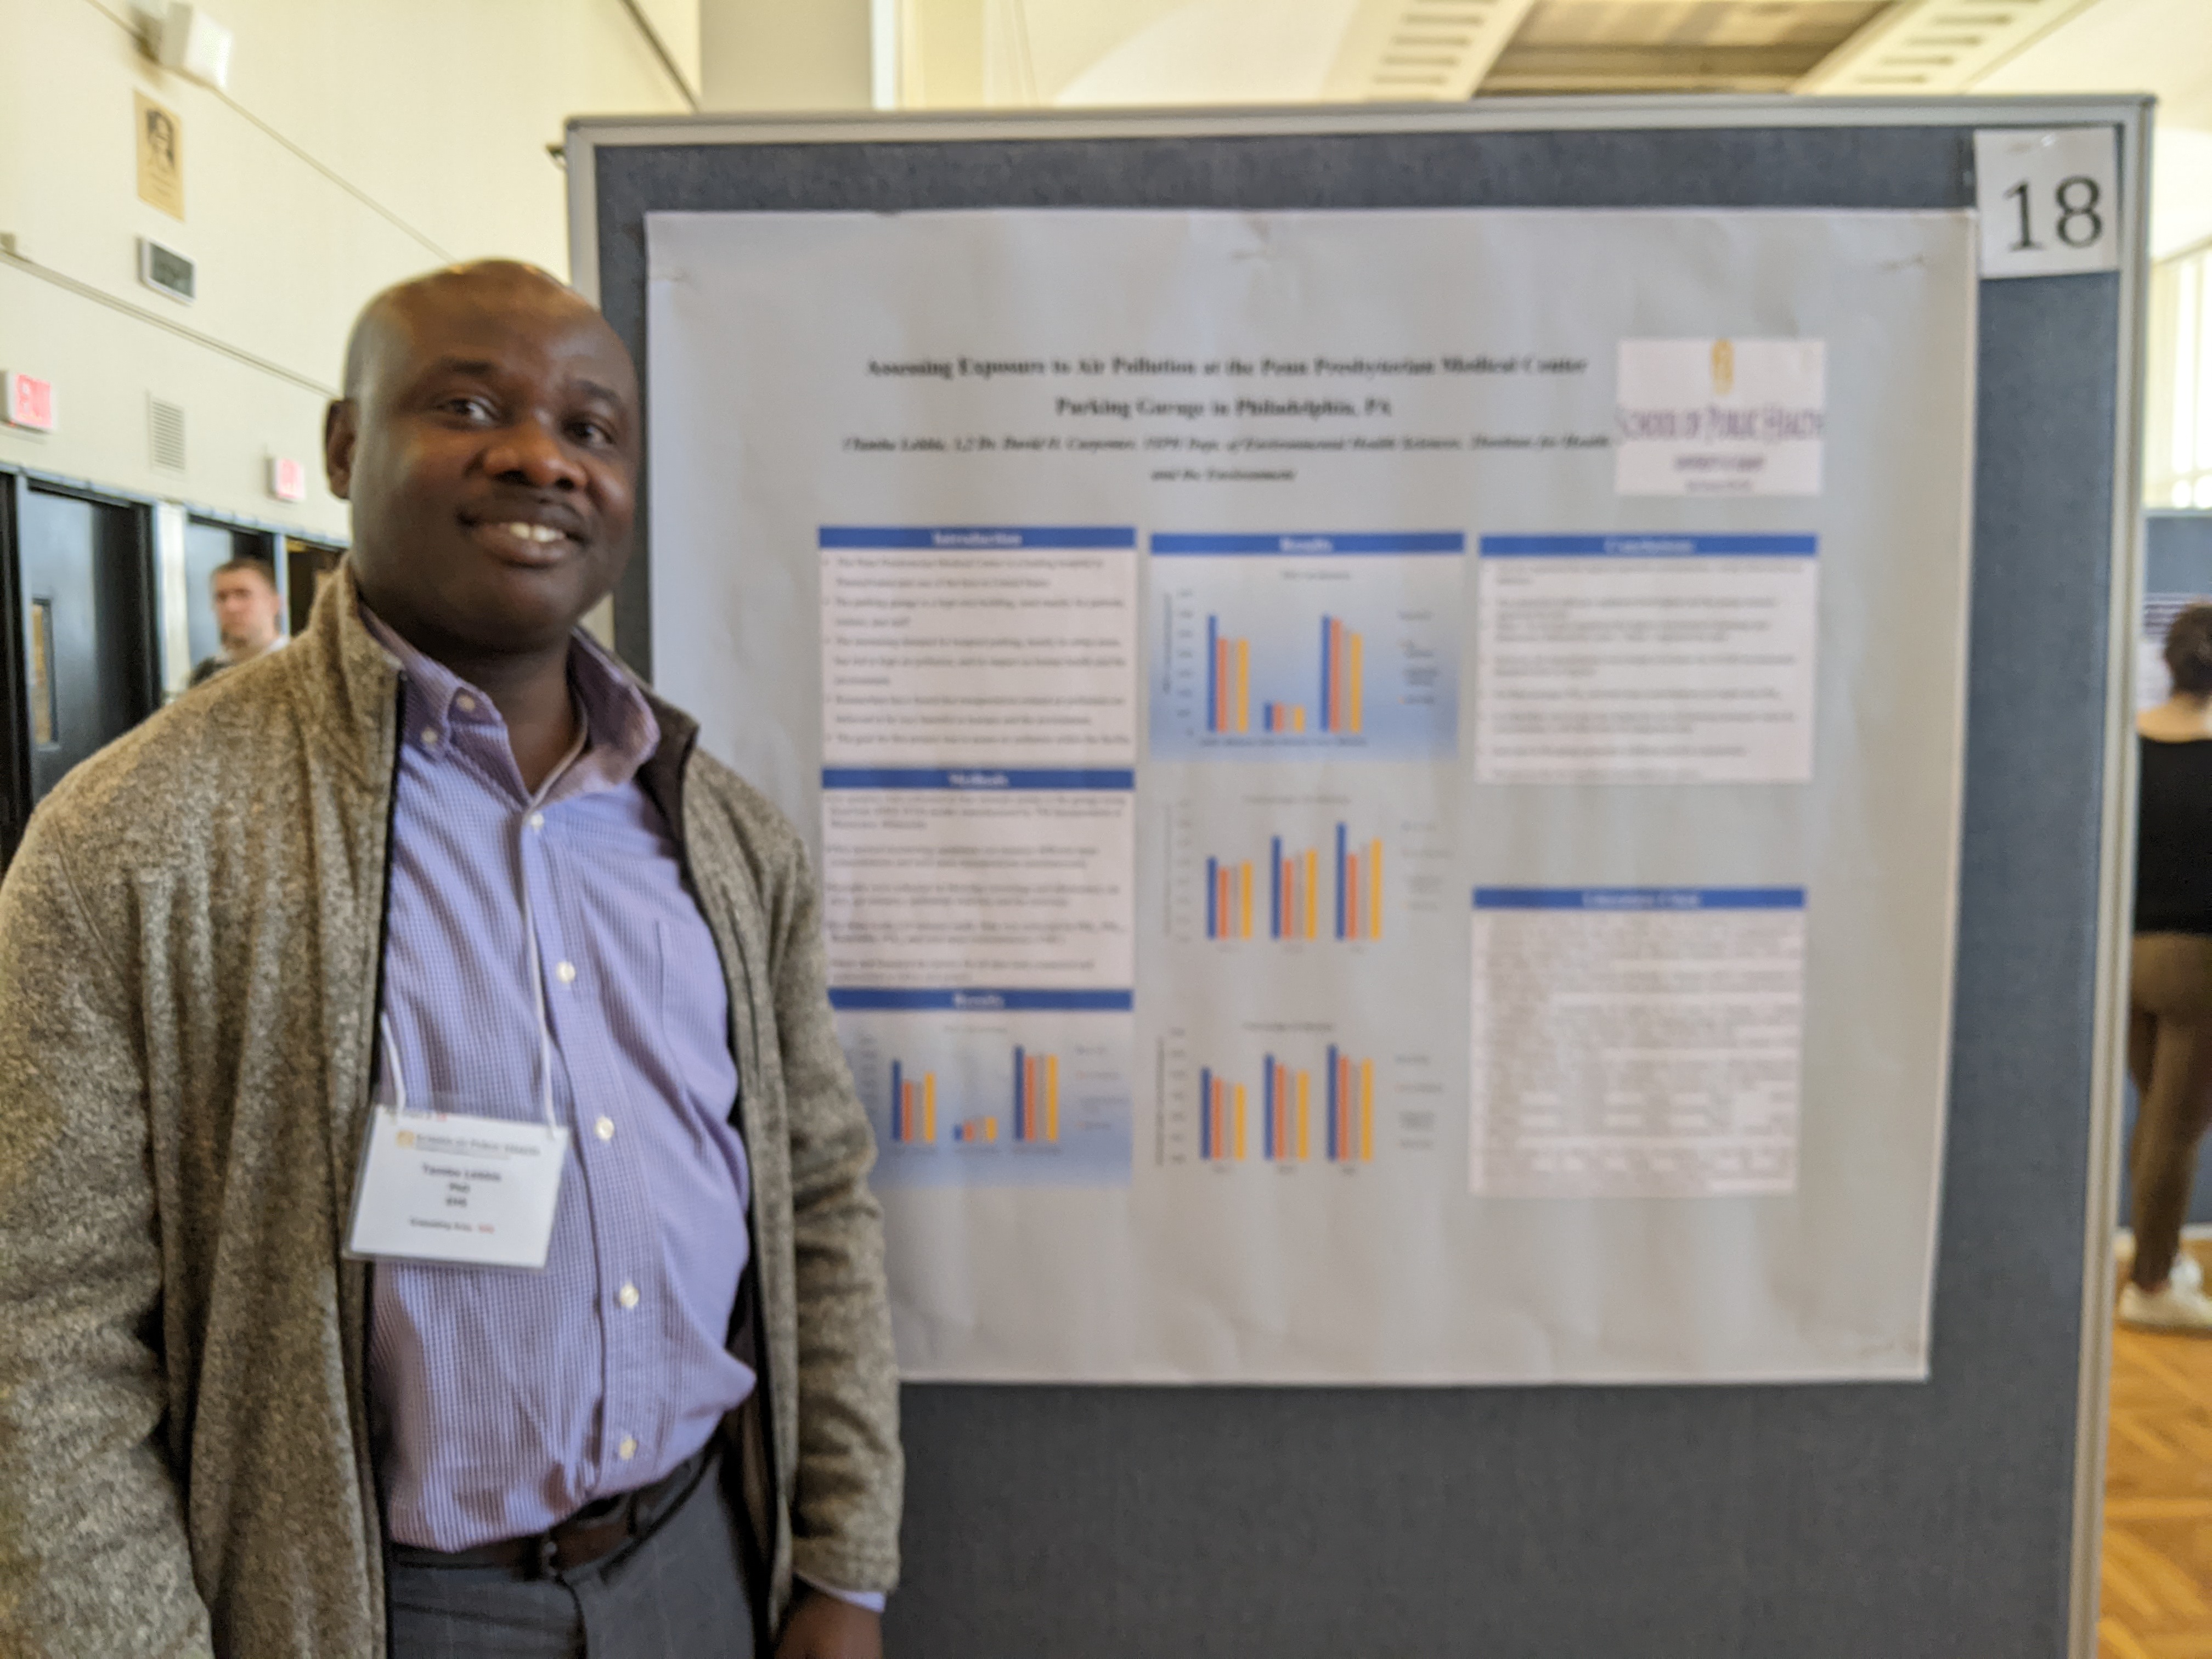 Tamba Lebbie stands next to his poster at Poster Day.